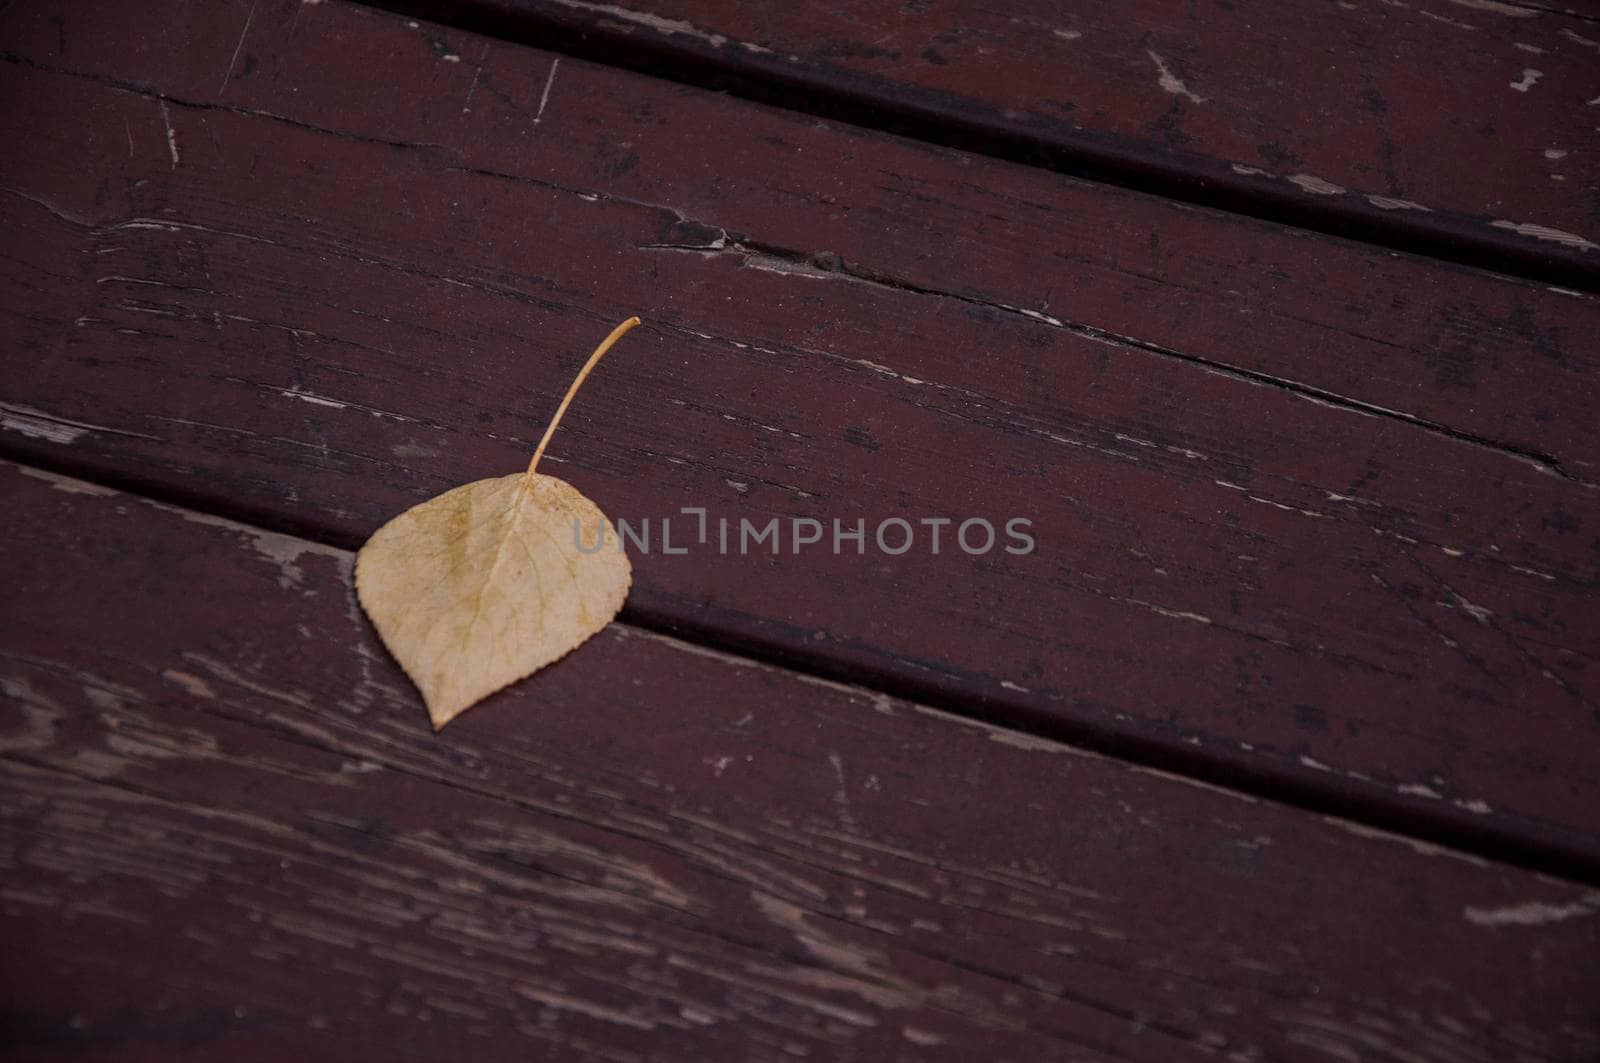 a fallen birch leaf lies on the open wooden platform floor of the city park, symbolizing the beginning of autumn and the end of summer